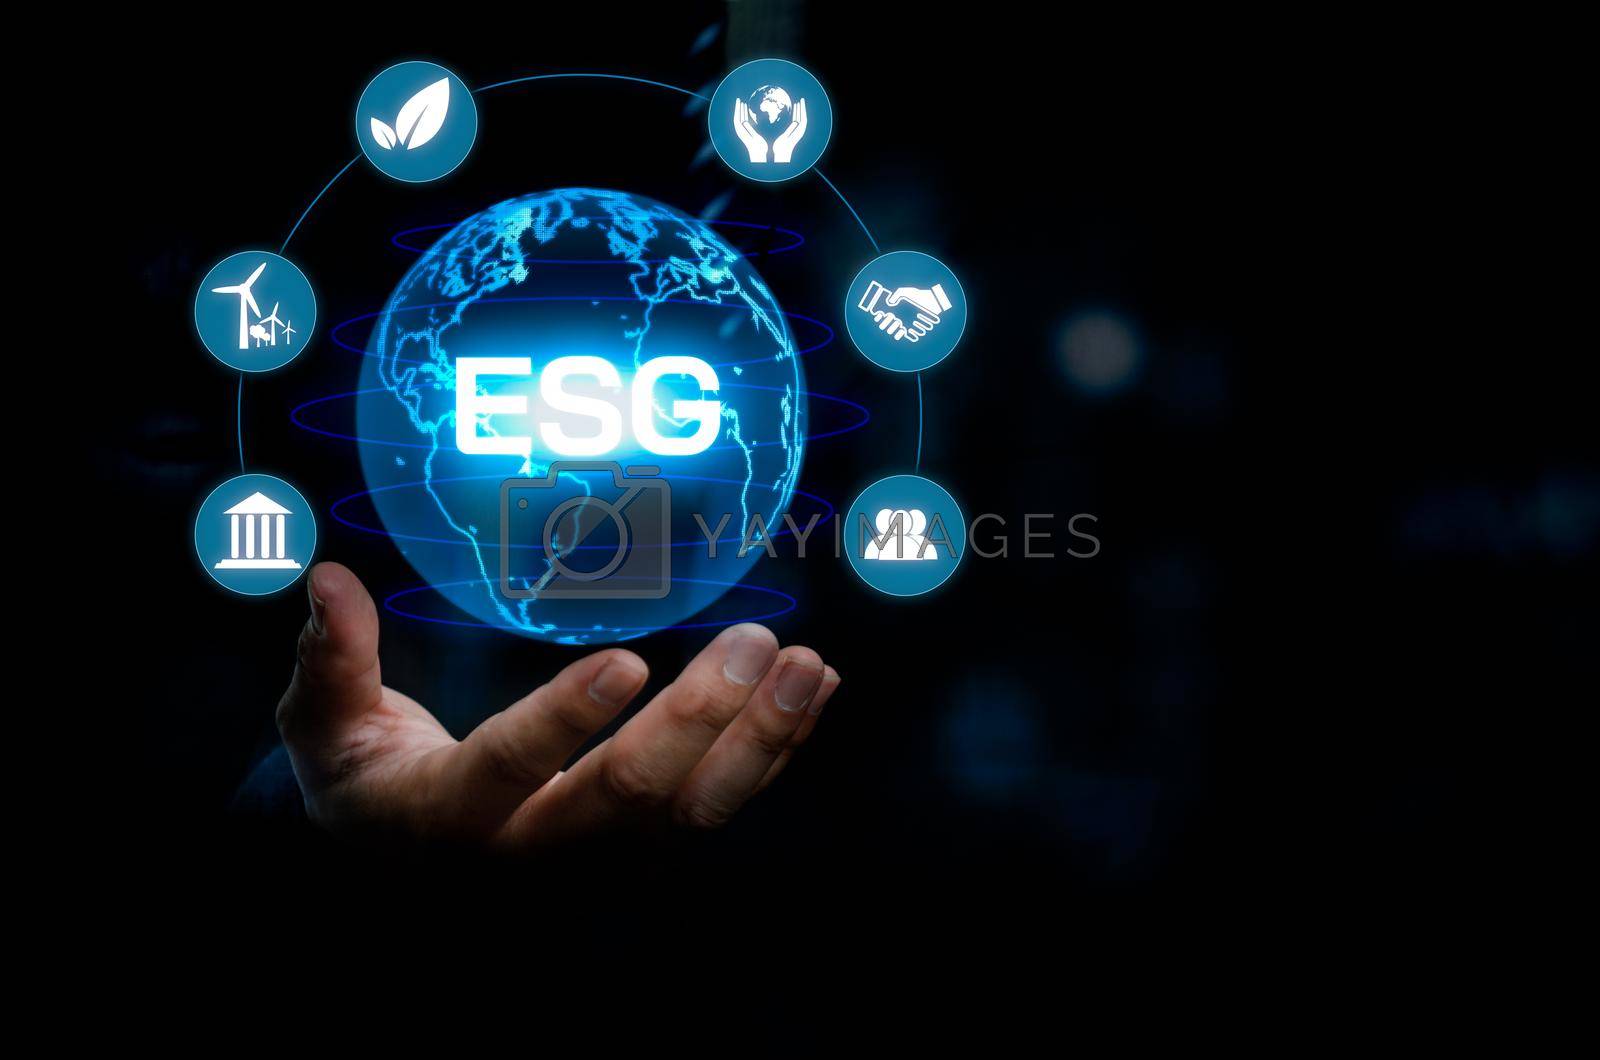 Royalty free image of Businessman touching ESG Environmental Social Governance virtual screen Internet Business Technology Concept. by aoo3771